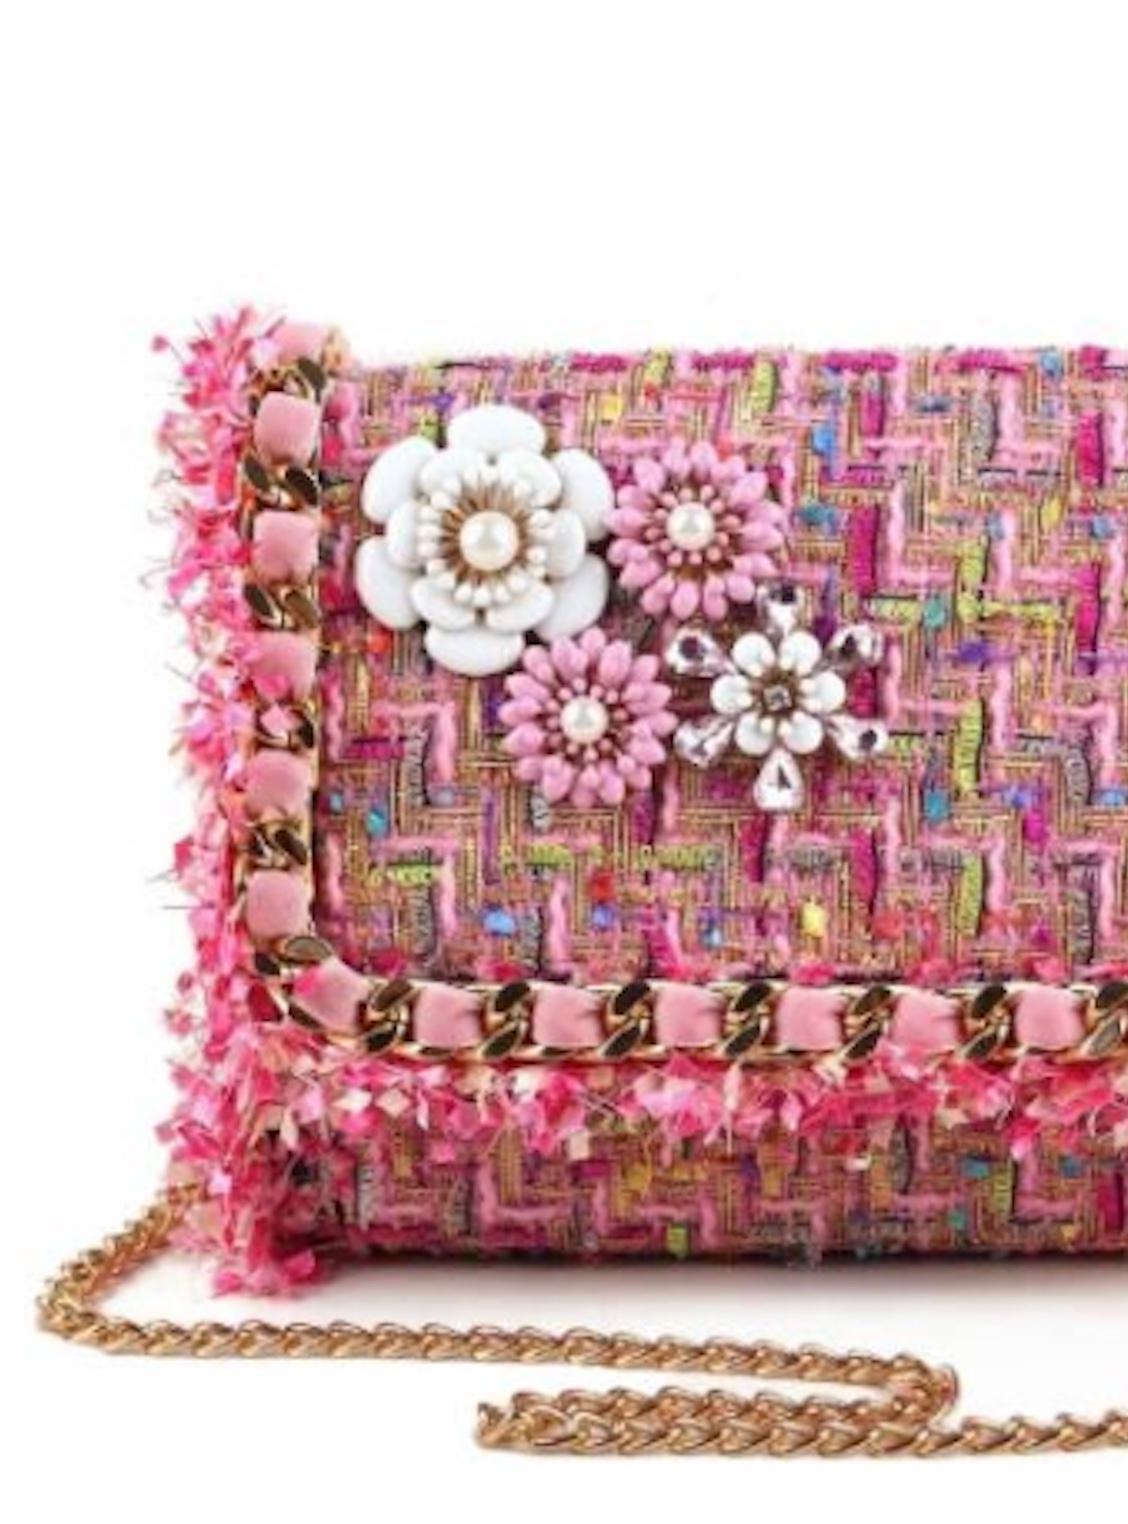 Magnetic snap closure
Floral charms w/faux pearls on front flap
Tweed fabric w/frayed edges
Velvet ribbon woven through chain on front flap
Interior patch pocket
Removable woven velvet chain strap

Measurements:
Length: 8in / 20.32cm
Width: 2.5in /